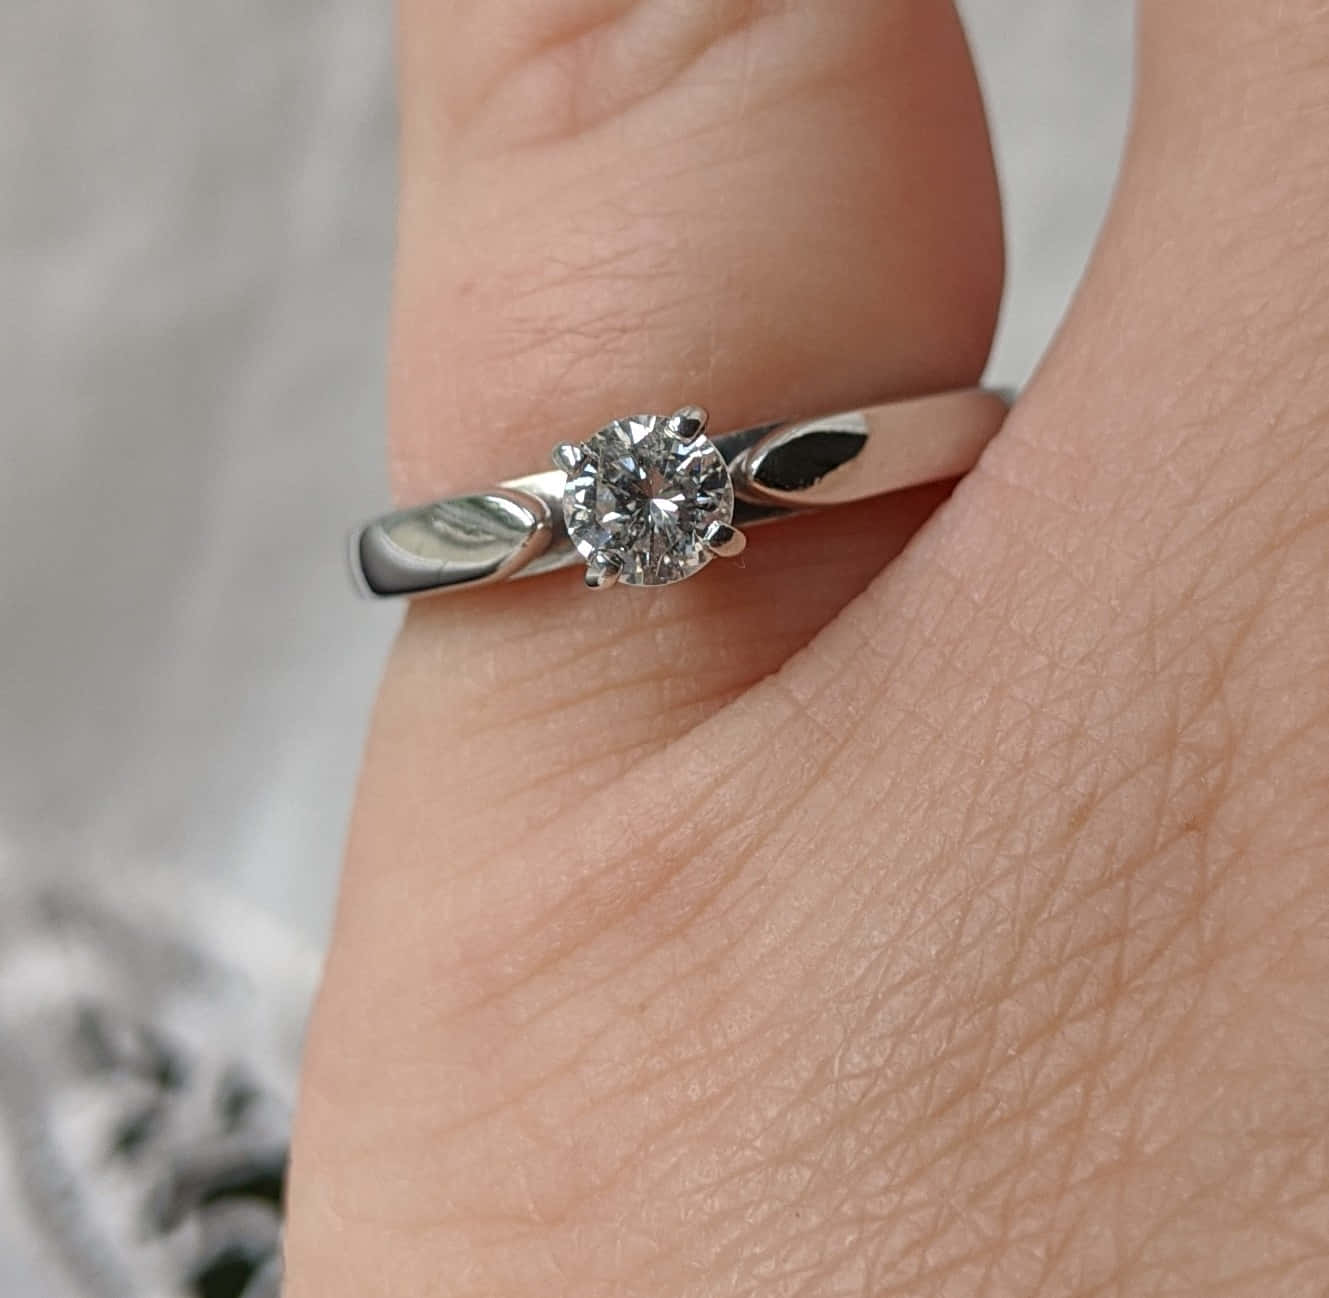 Minimalist Silver Engagement Ring Picture